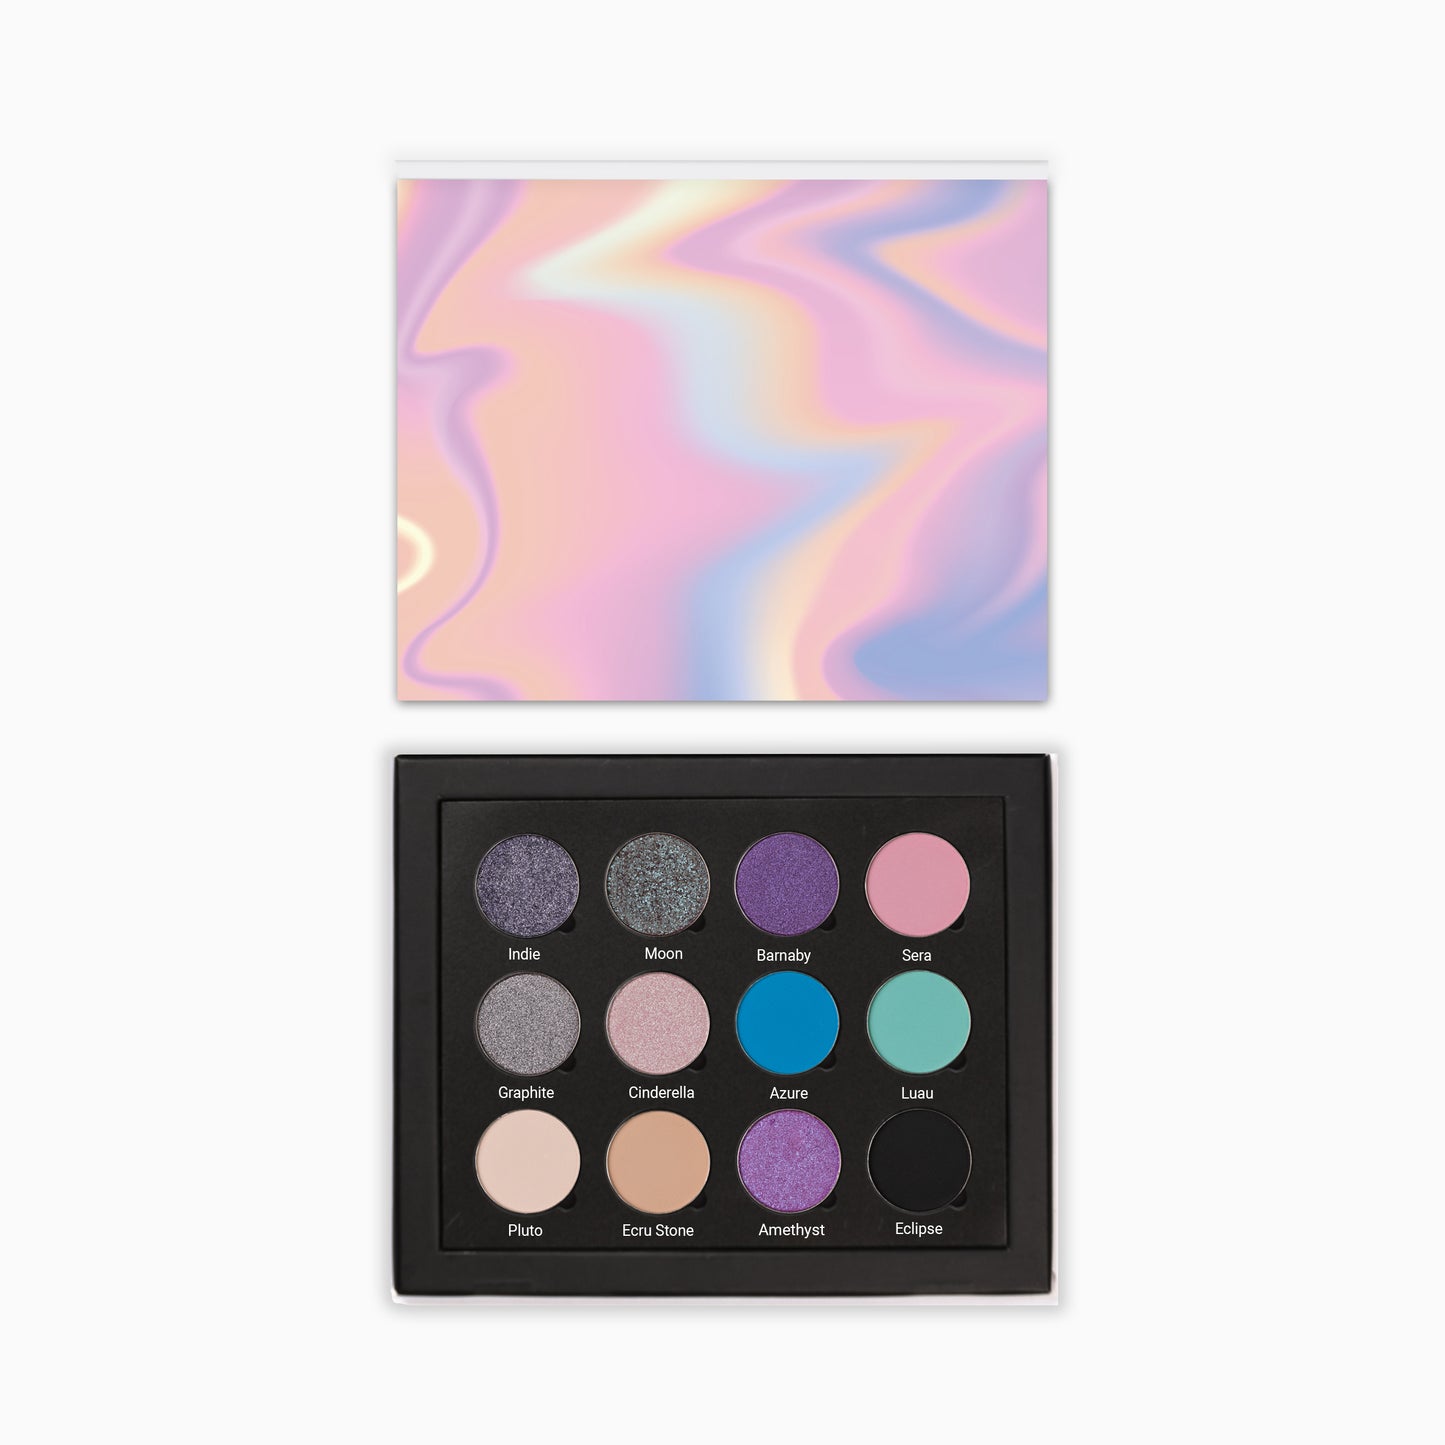 Holographic - 12 Eye Palette